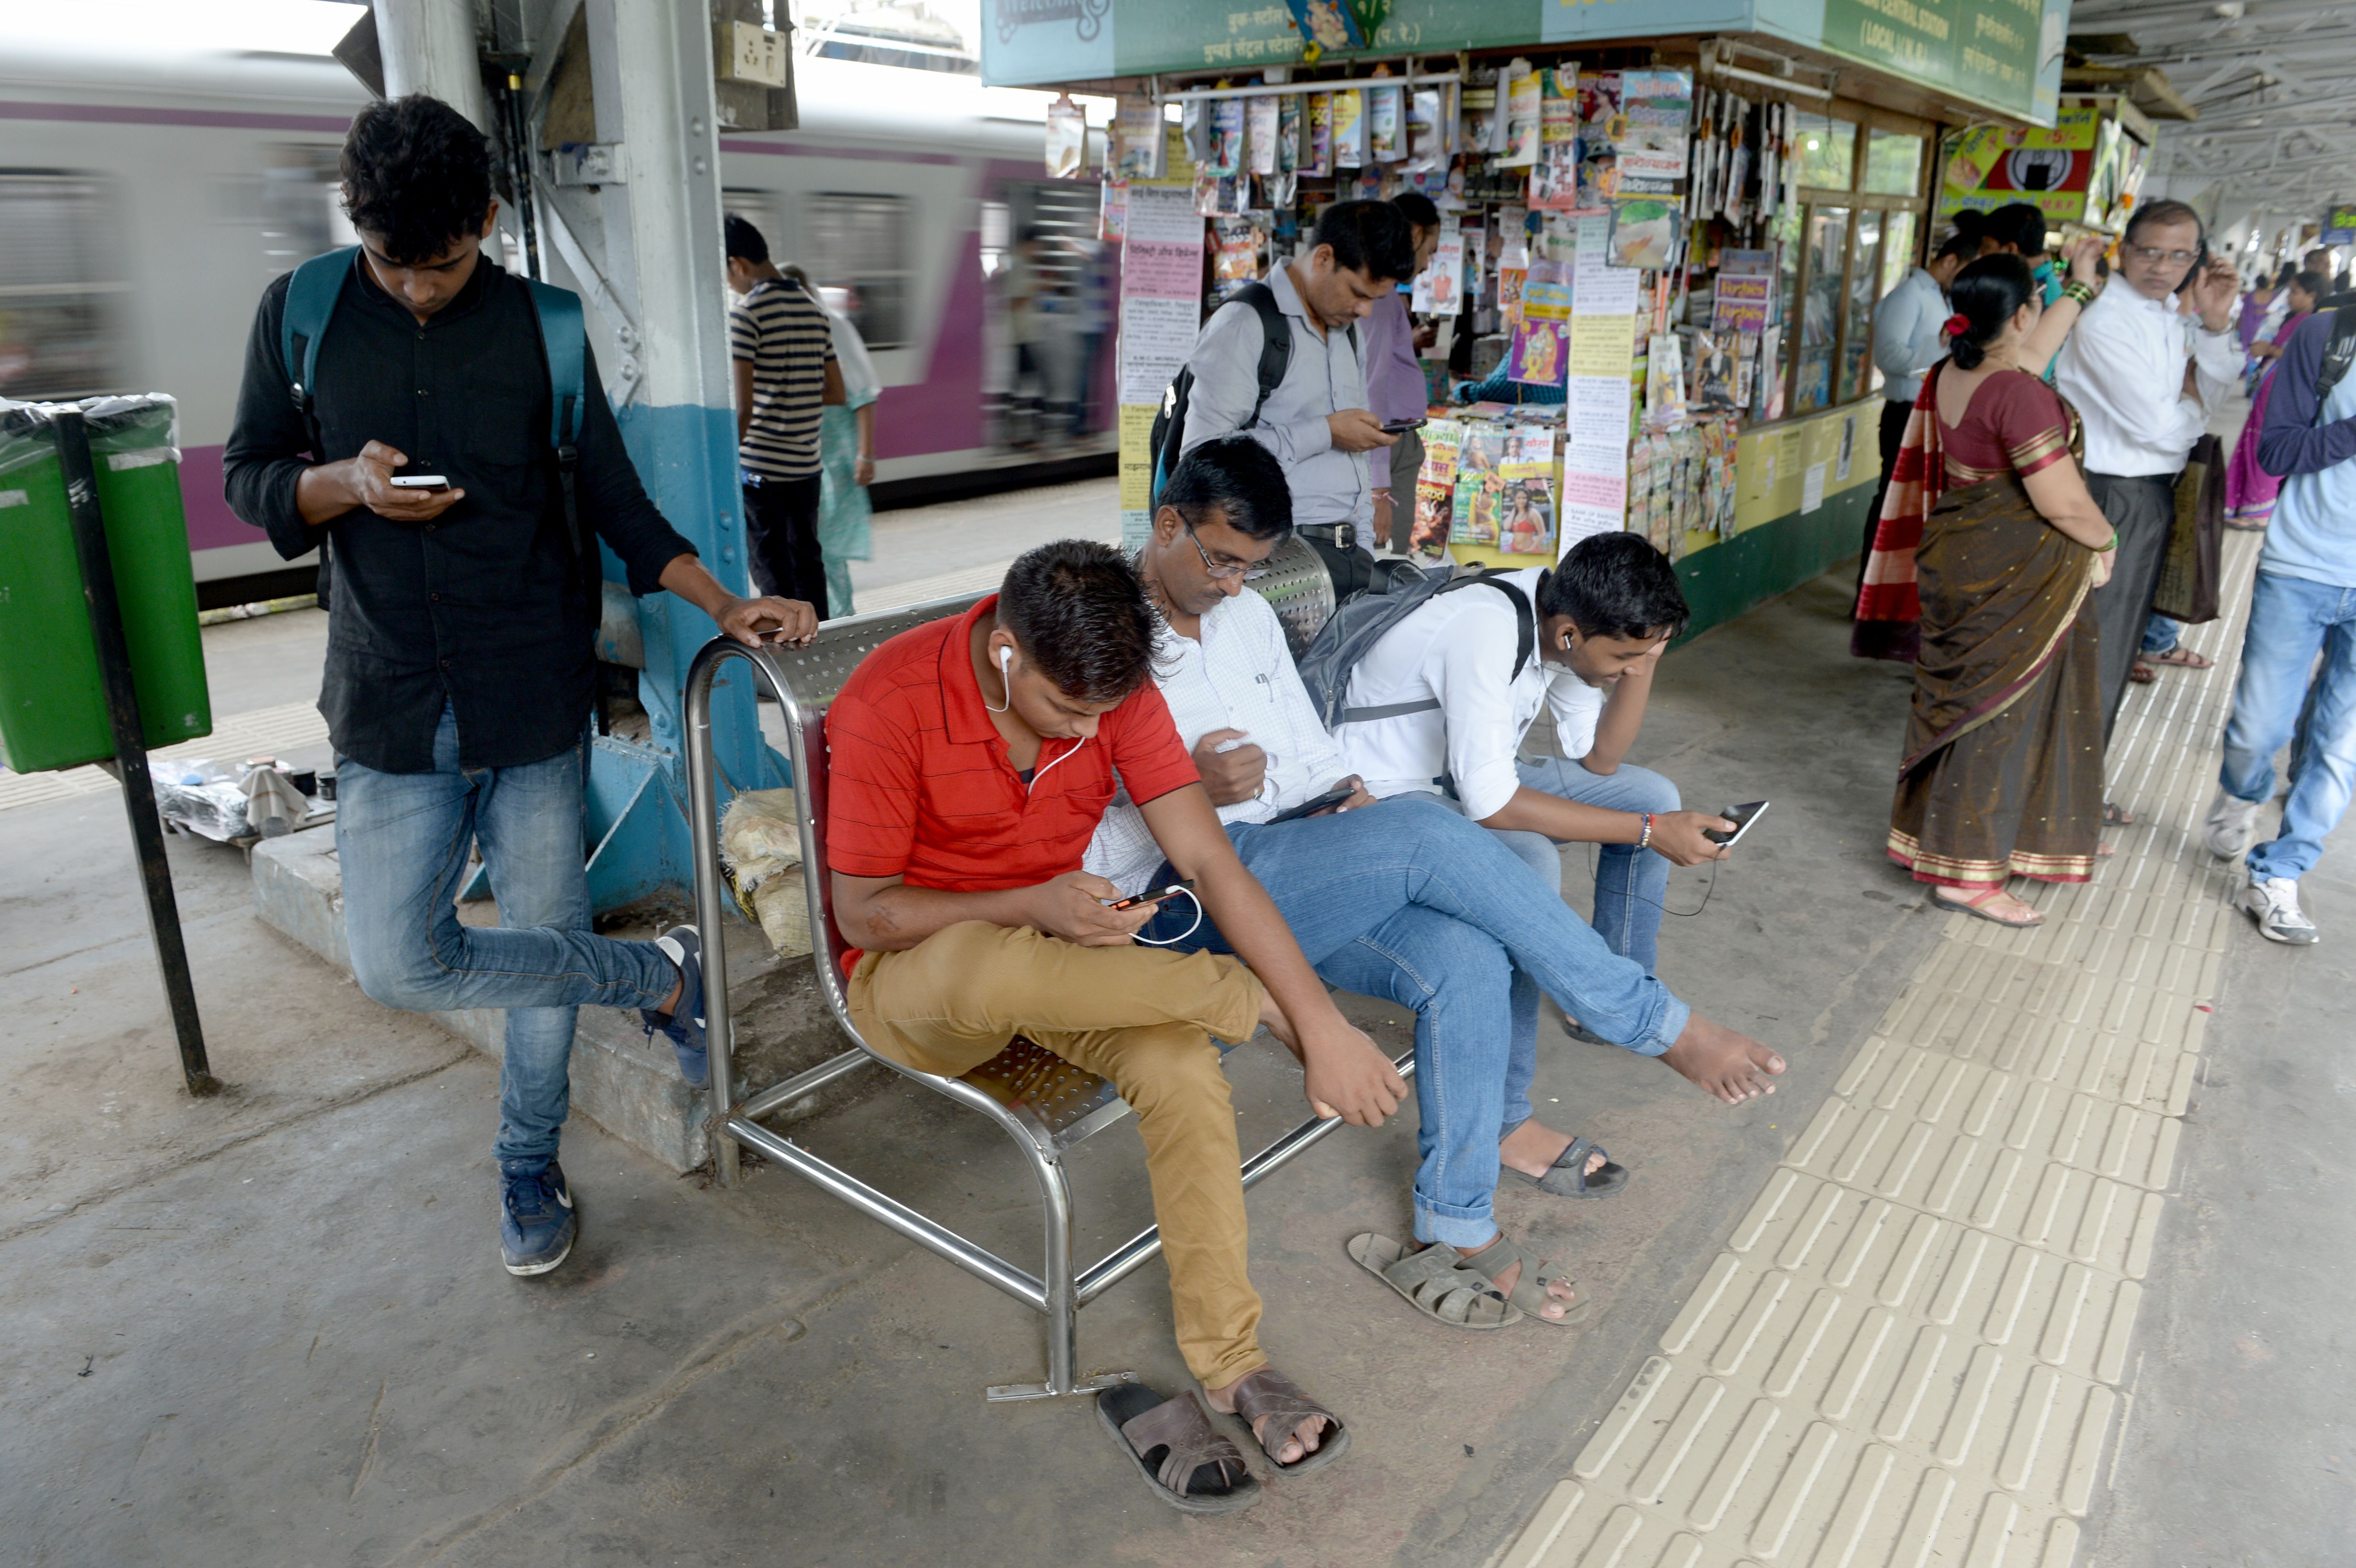 India’s most popular services are becoming super apps